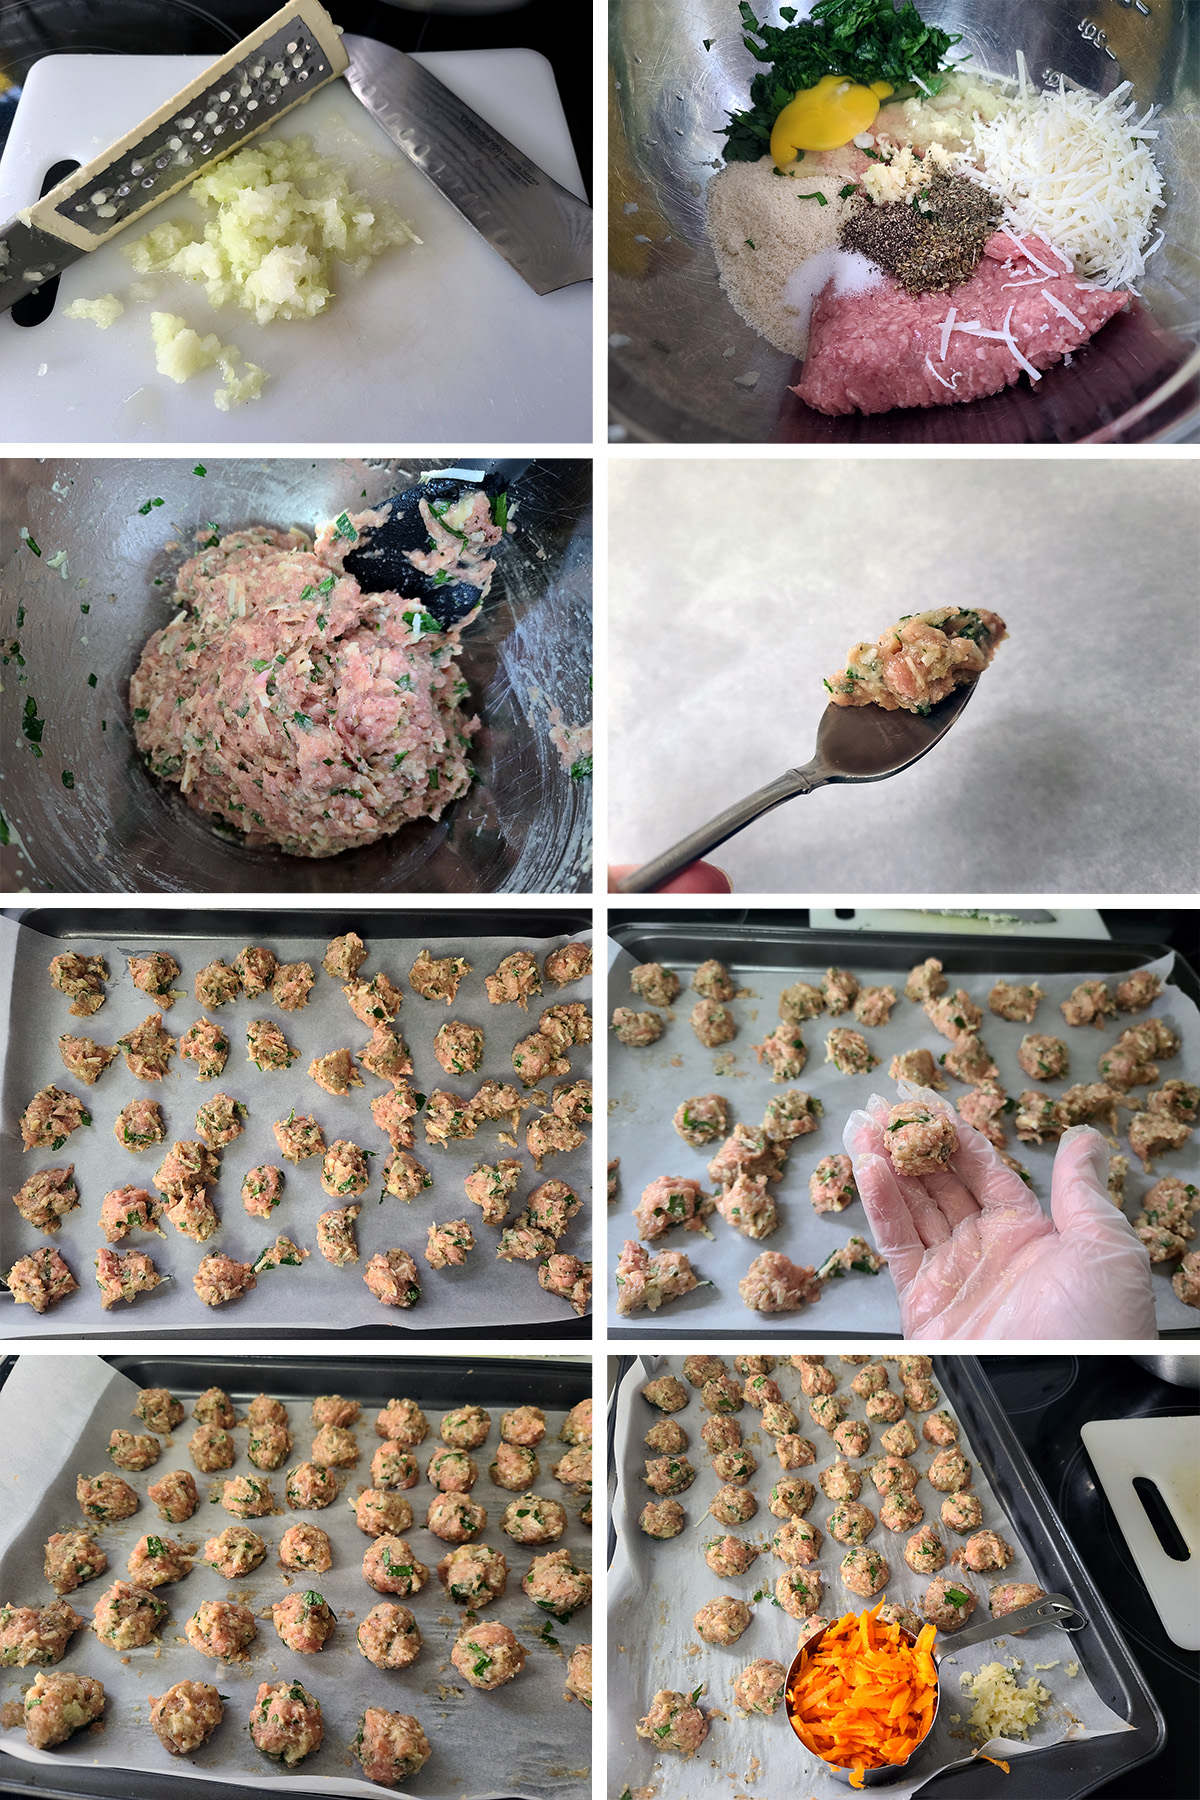 An 8 part image showing the meatball batter being mixed together and formed into tiny meatballs.